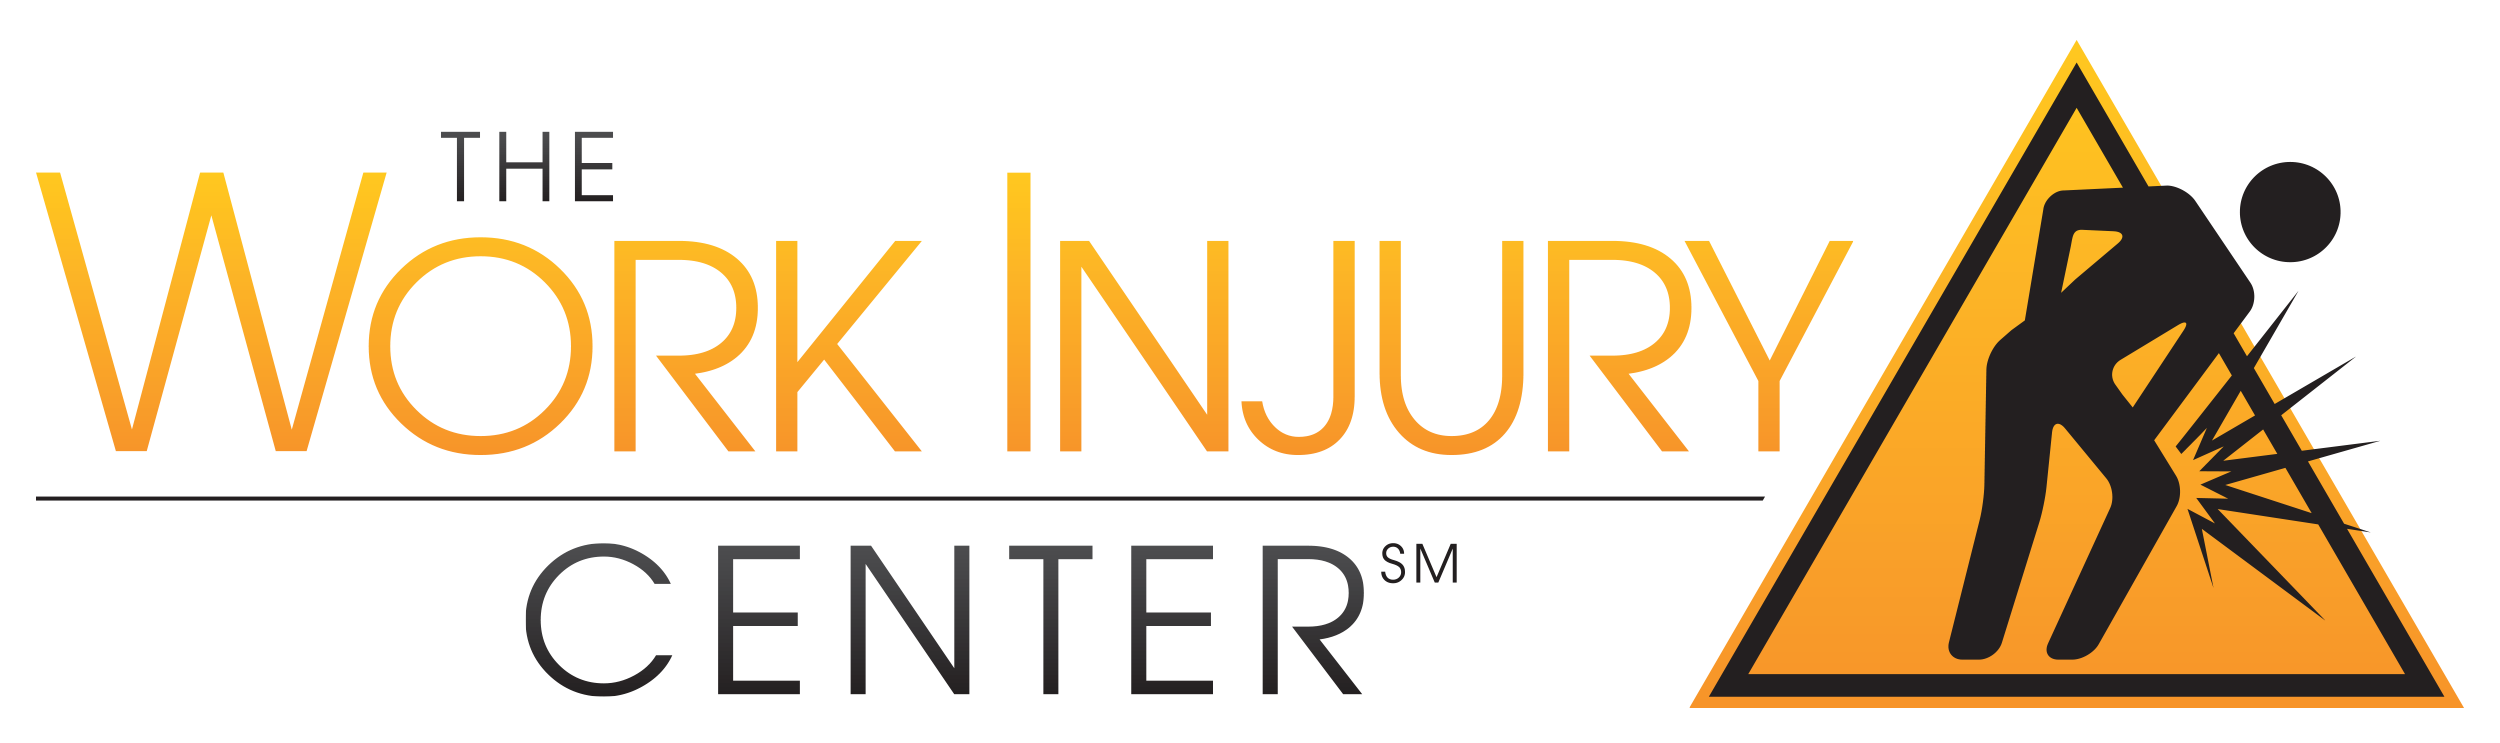 The Work Injury Center Provides Strong Justice to Work Accident Victims in Both Virginia and North Carolina